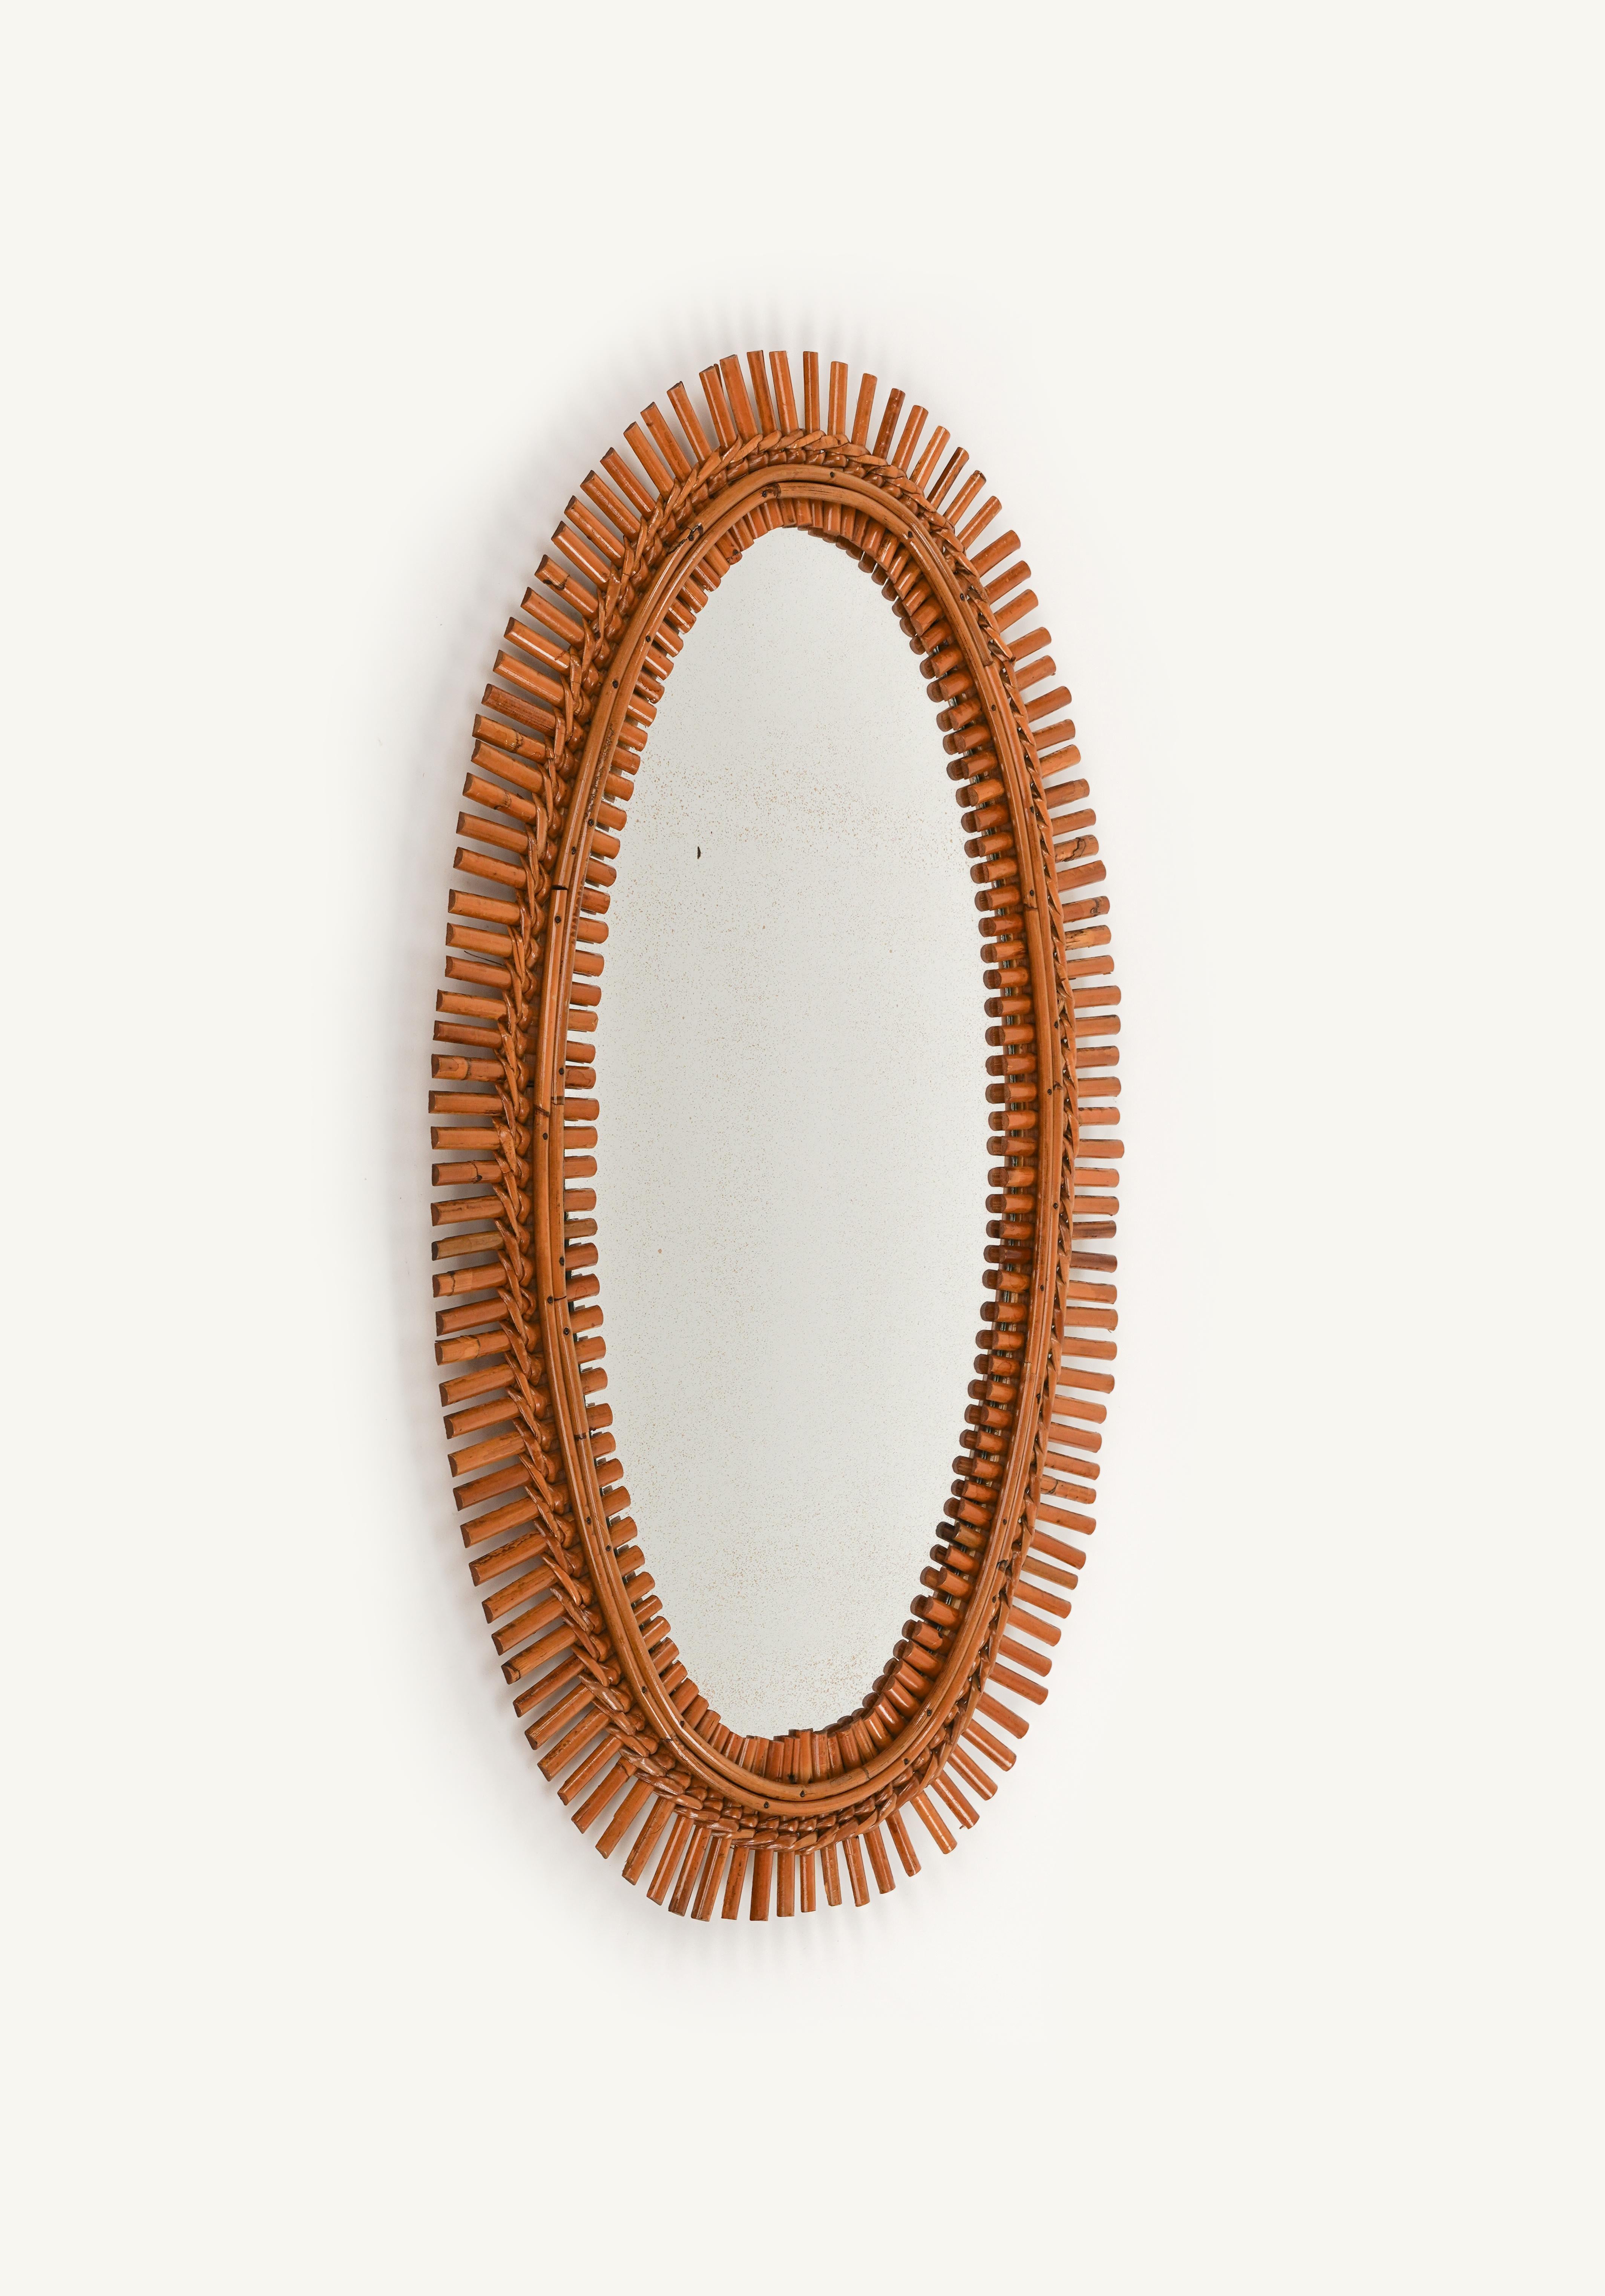 Midcentury beautiful oval wall mirror in rattan and bamboo in the style of Franco Albini.

Made in Italy in the 1960s.

The mirror is original of the period is charming patina.